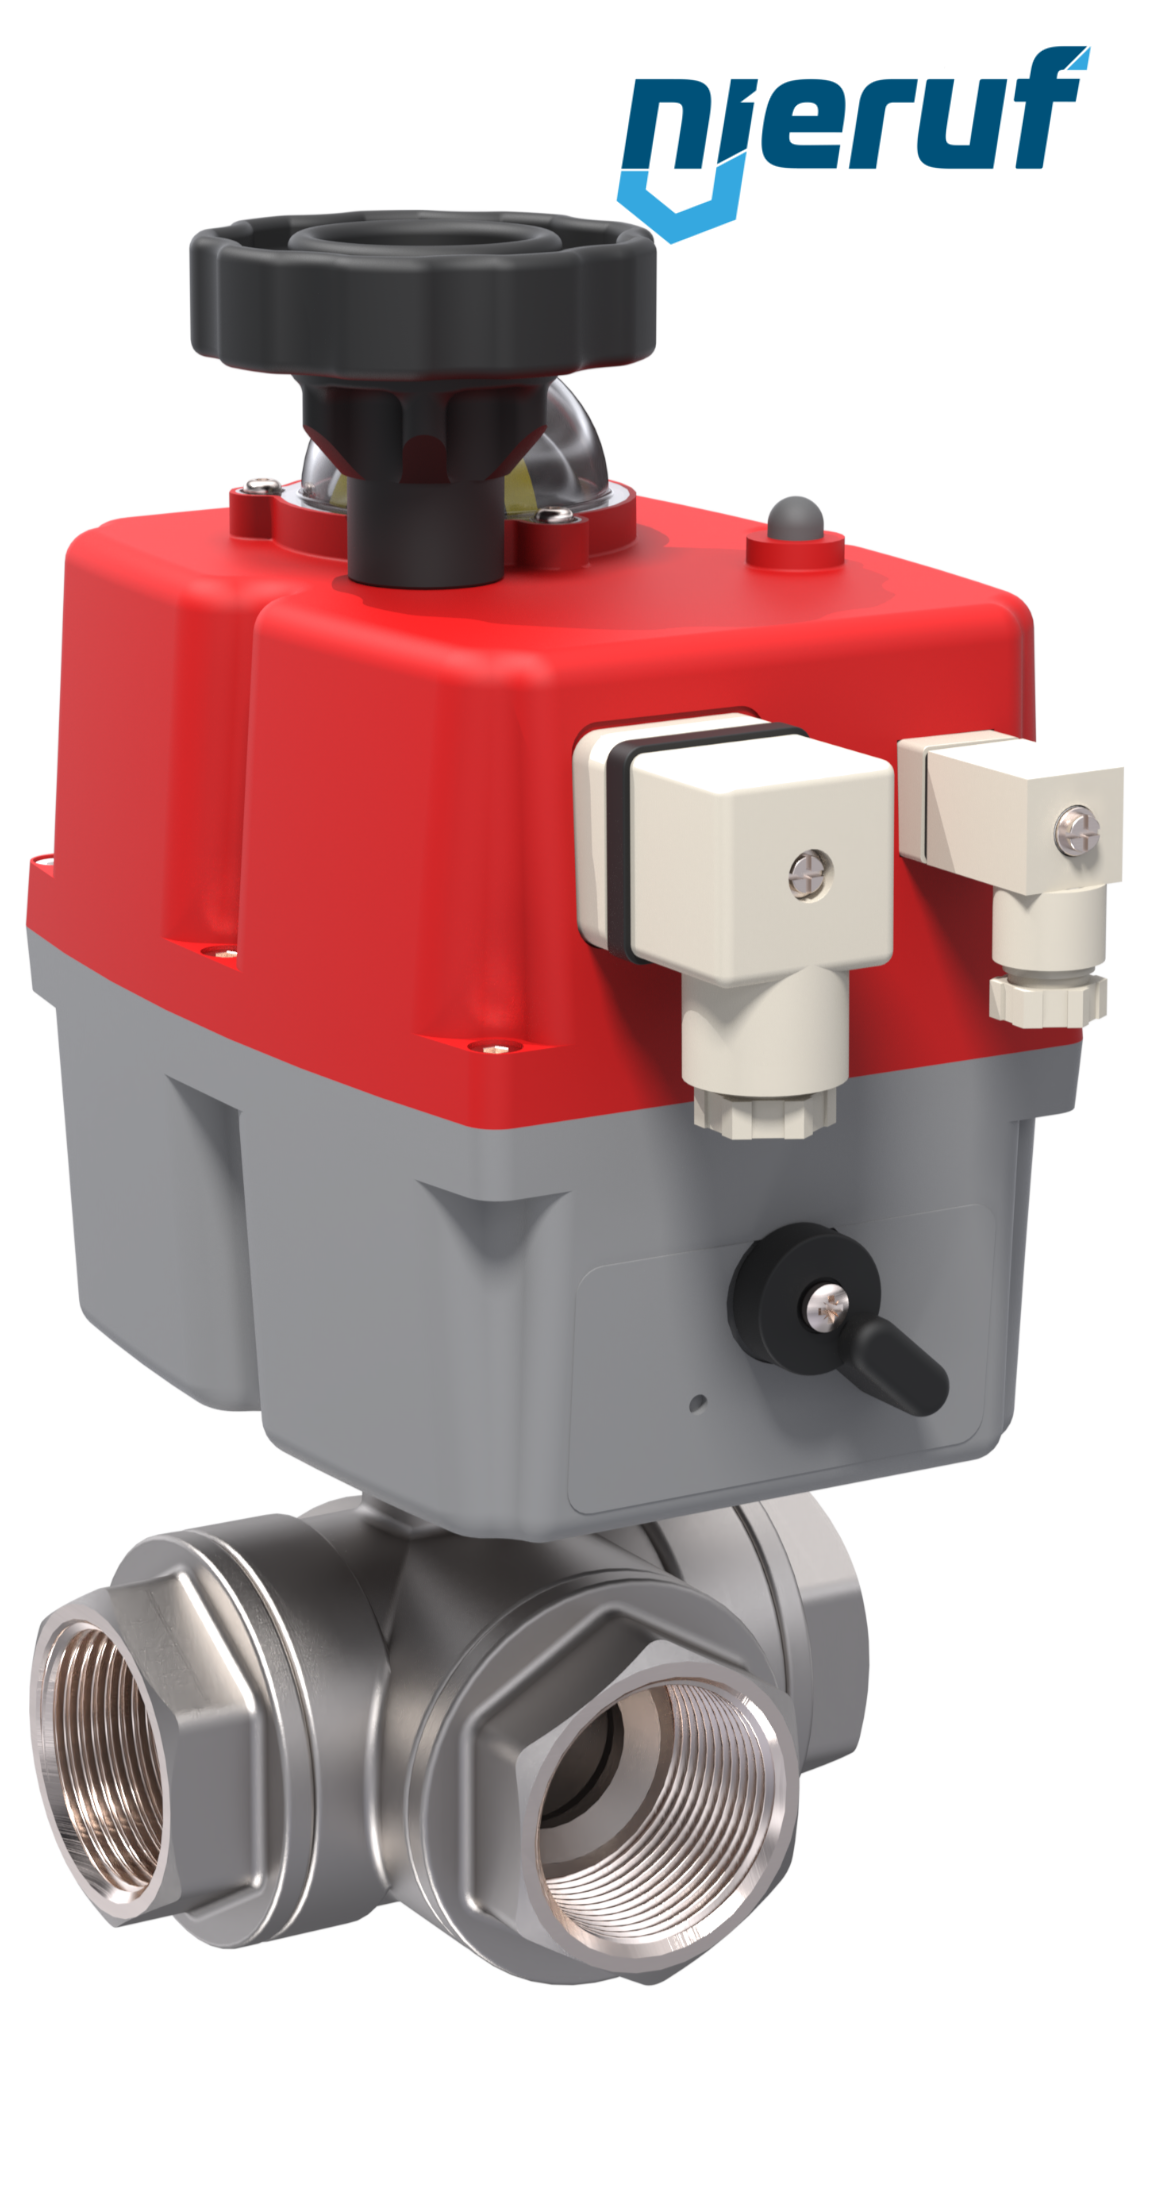 3 way automatic-ball valve 24-240V DN20 - 3/4" inch stainless steel reduced port design with T drilling